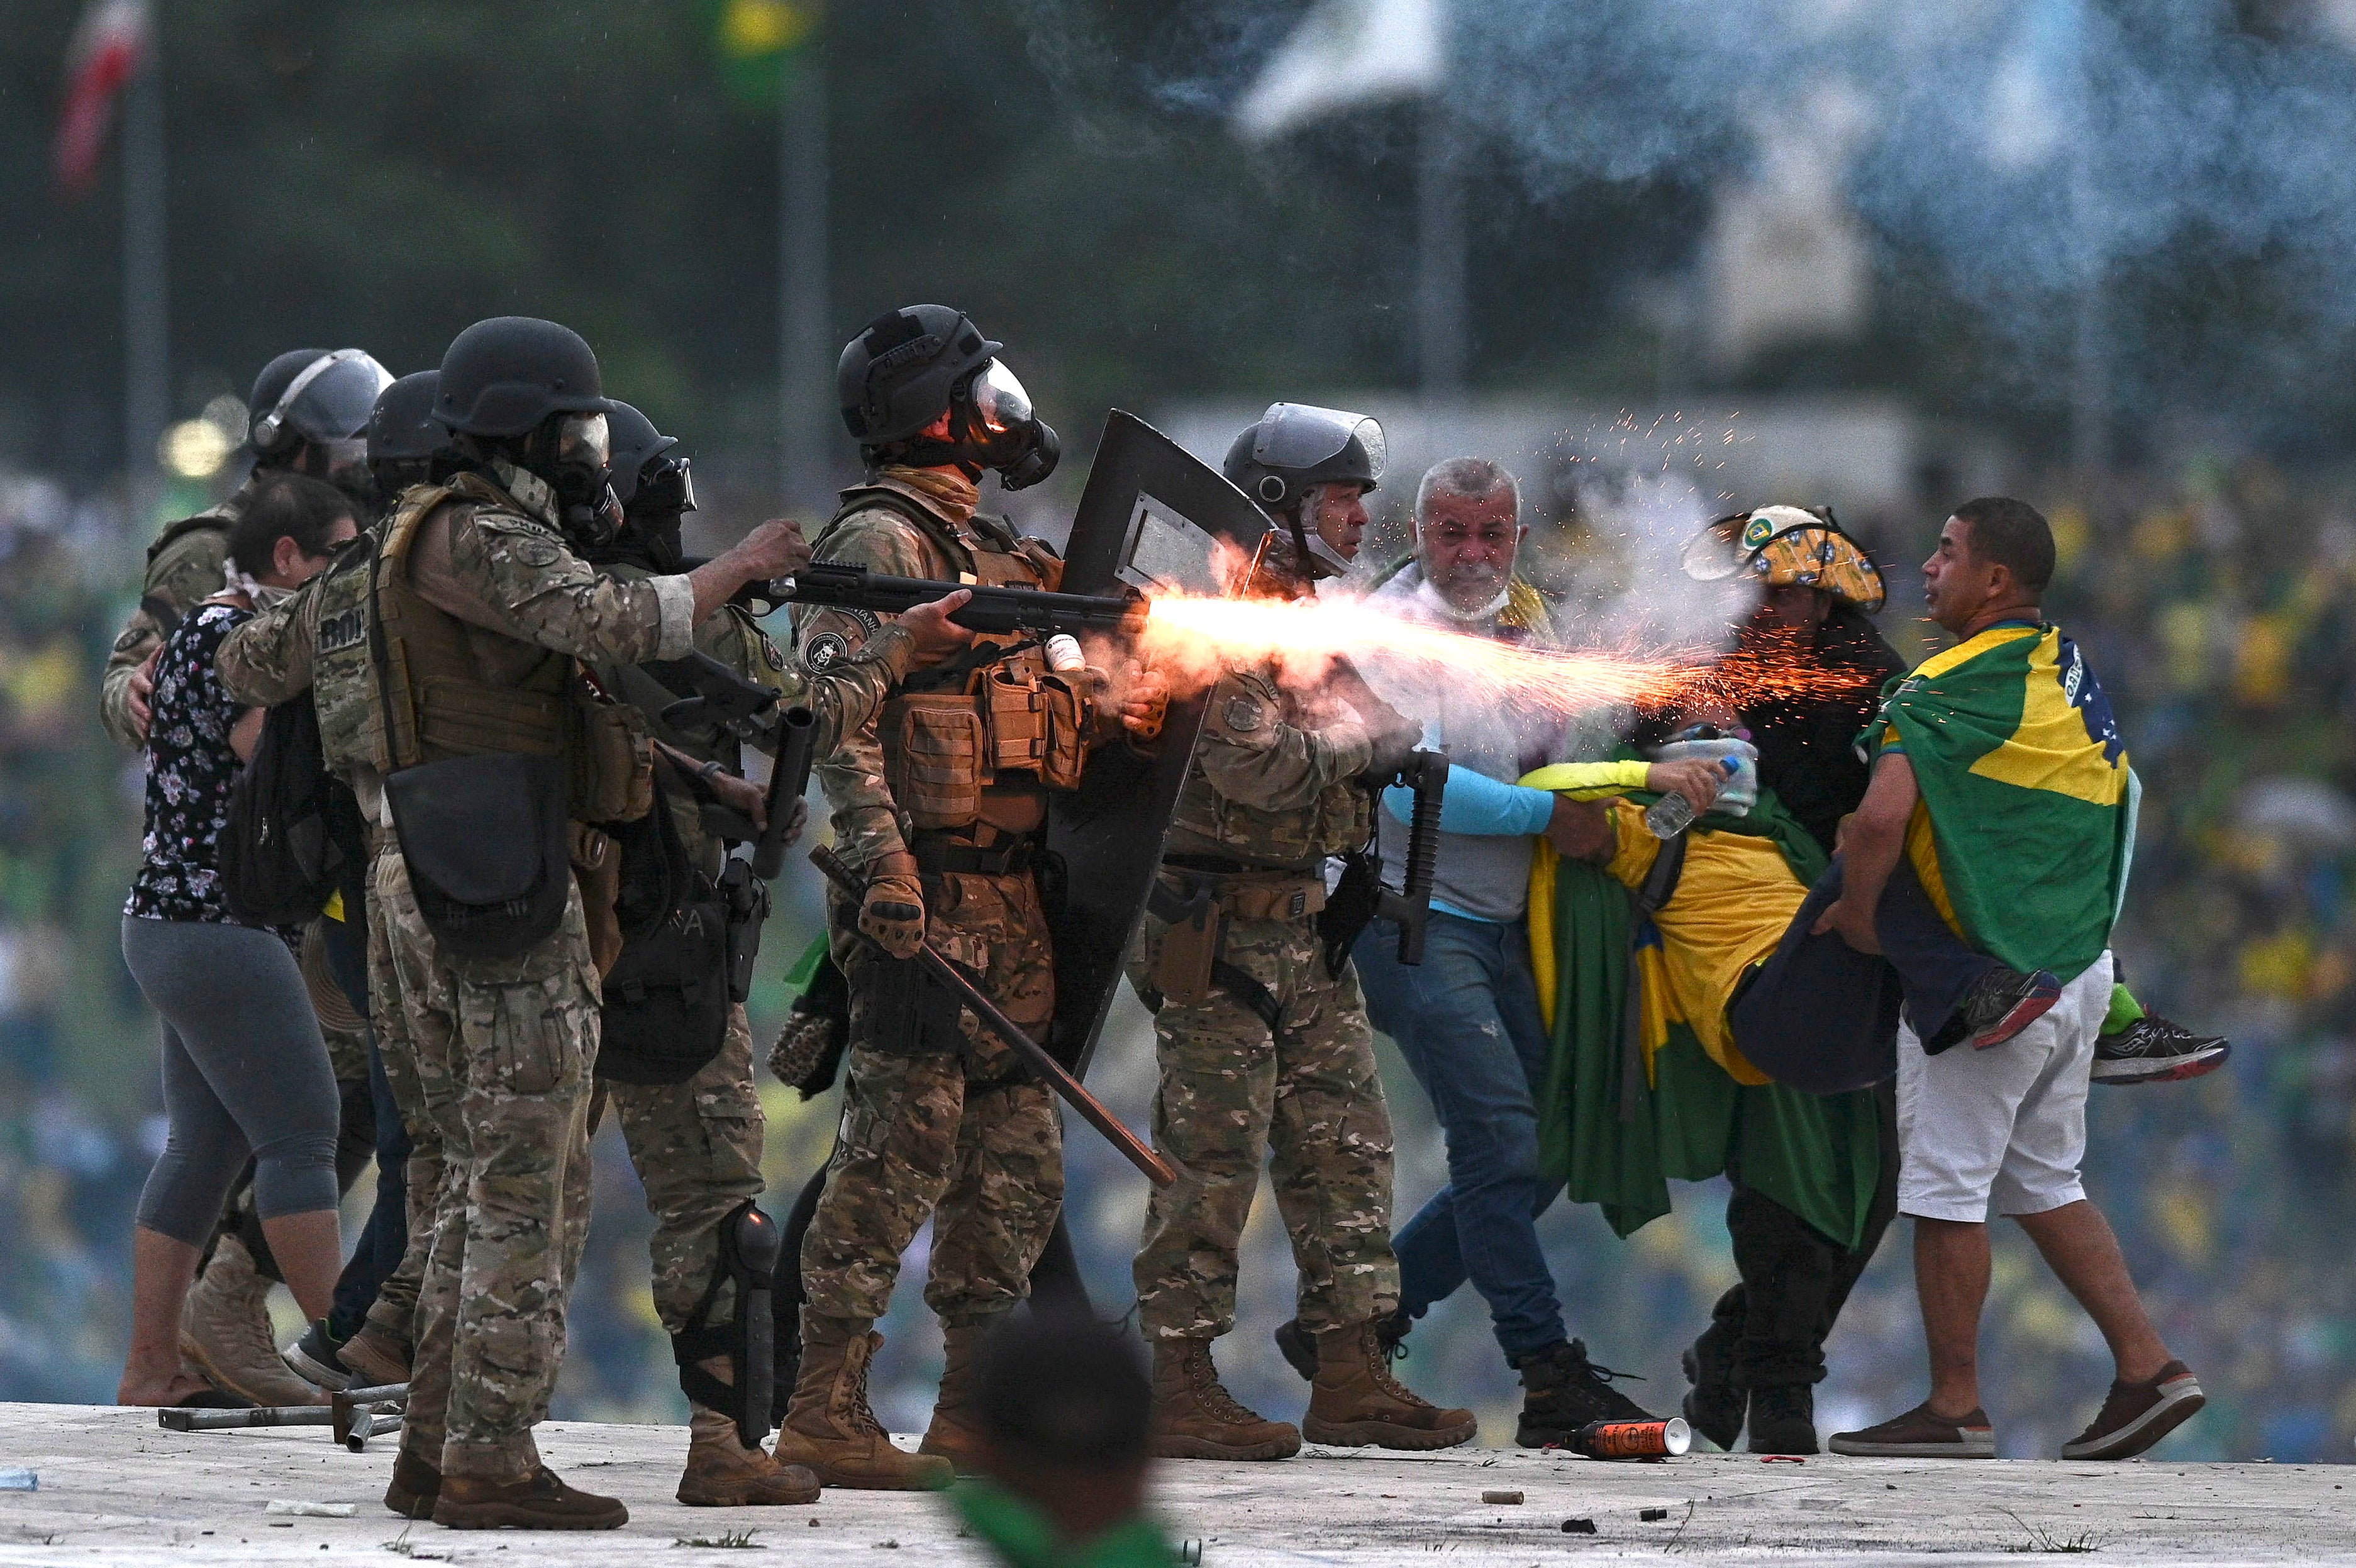 Police confront Bolsonaro supporters during the clashes